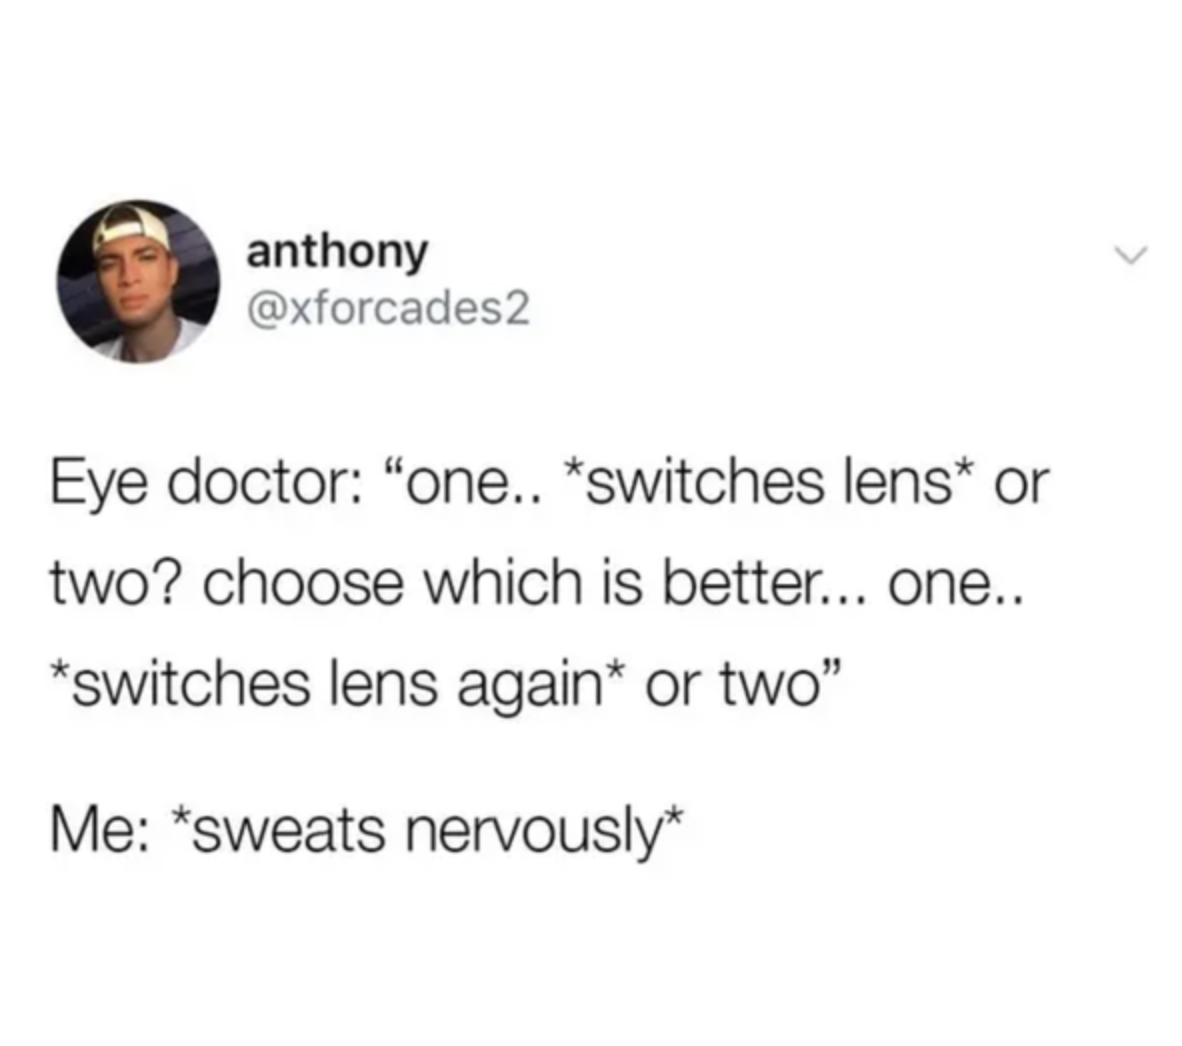 comment about how you can&#x27;t tell the difference when the eye doctor switches lensees during a test